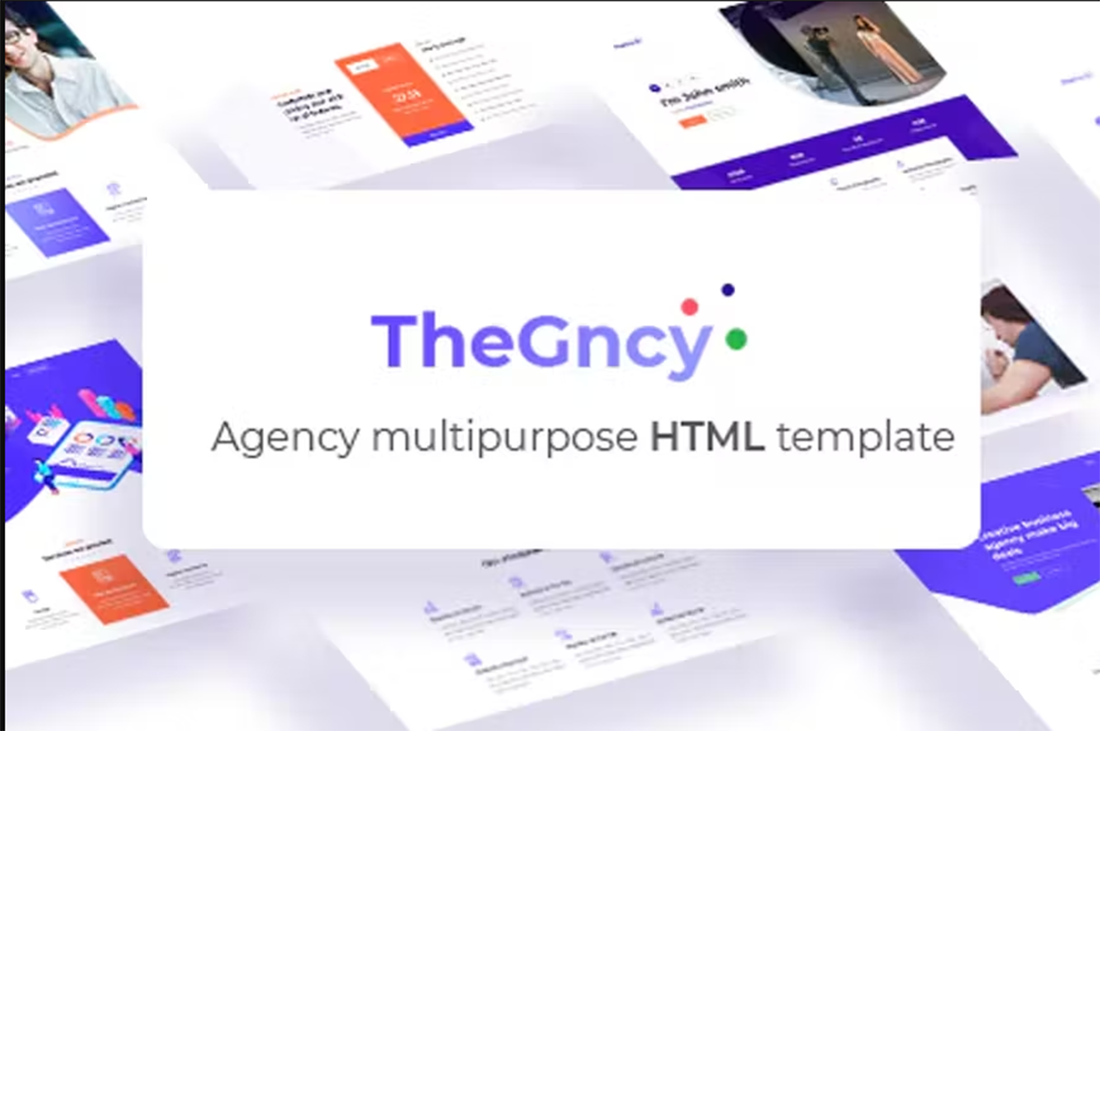 Free TheGncy Multipurpose Agency HTML Template cover image.